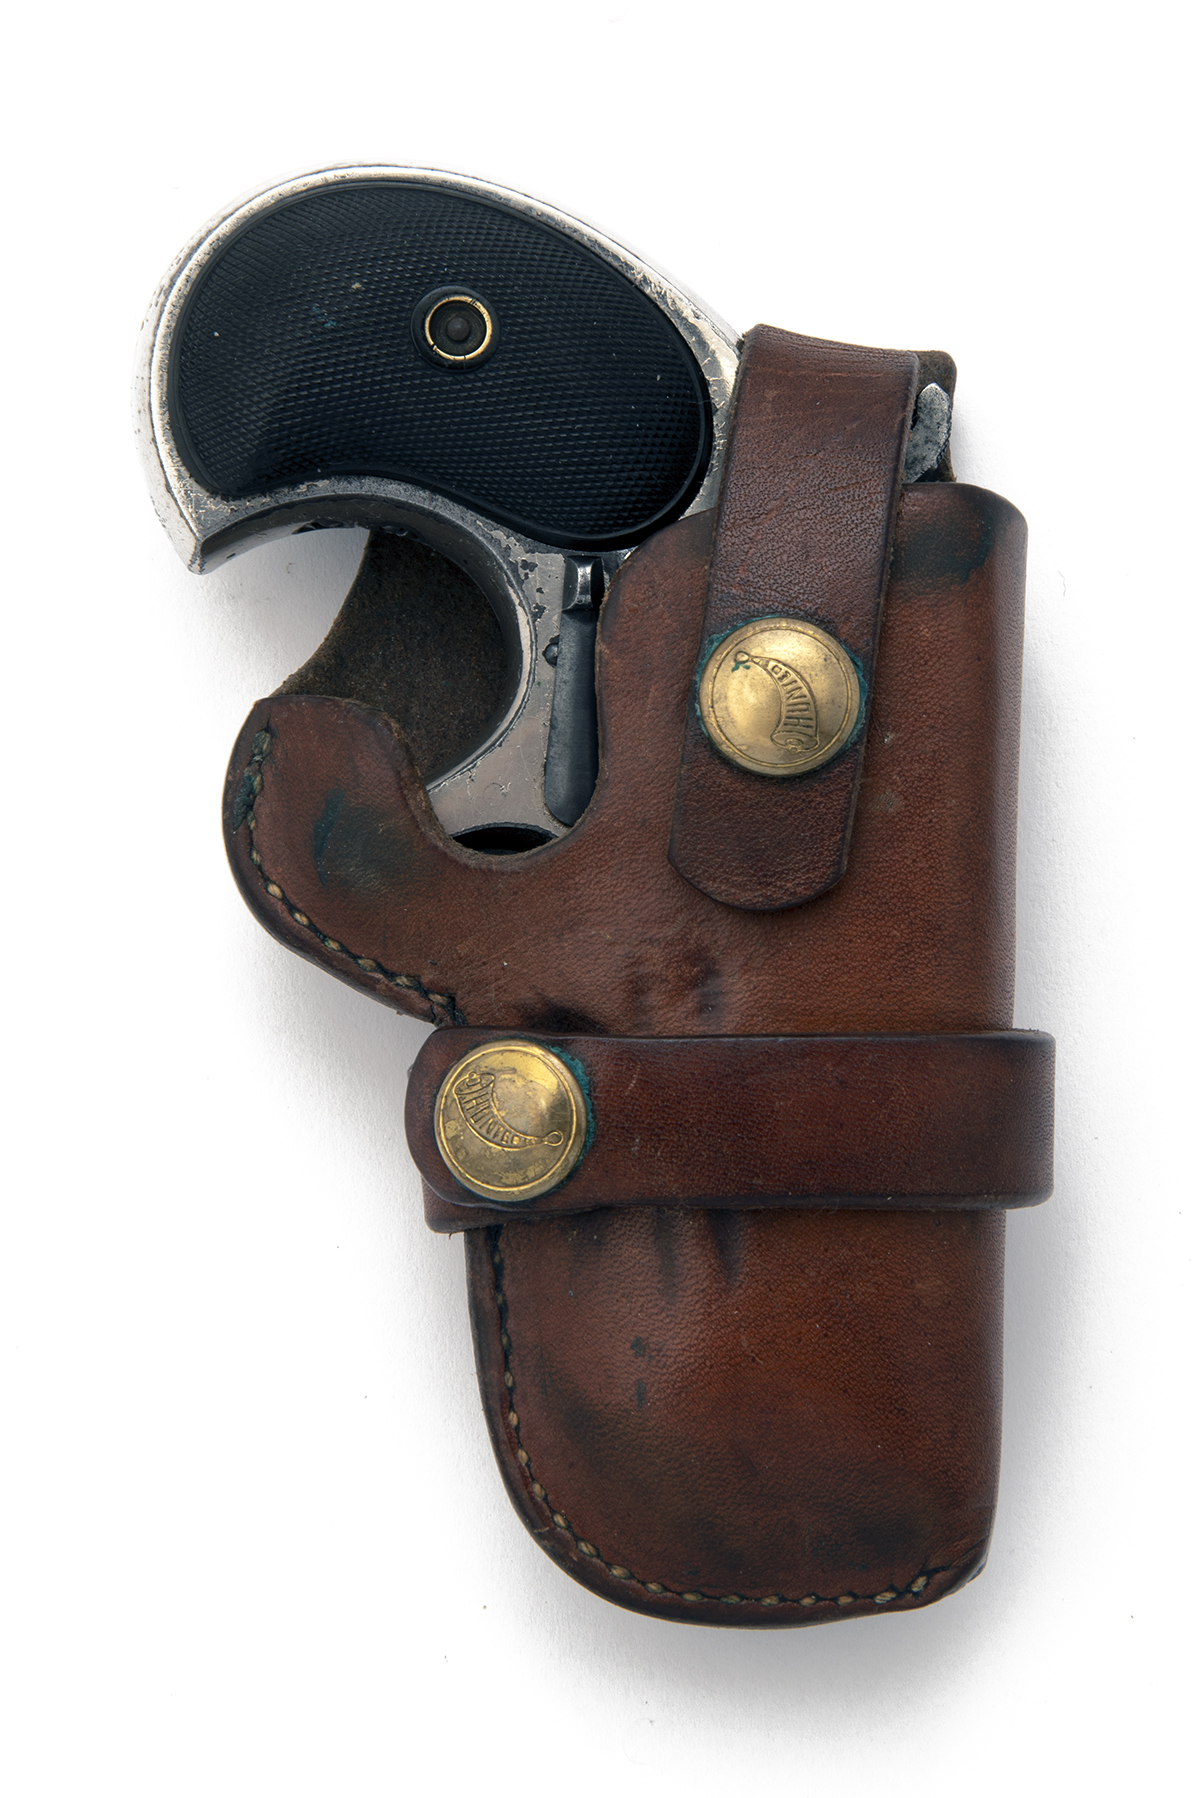 REMINGTON ARMS CO., USA A .41 RIMFIRE OVER-UNDER DERRINGER PISTOL, serial no. 594, type II (or model - Image 3 of 3